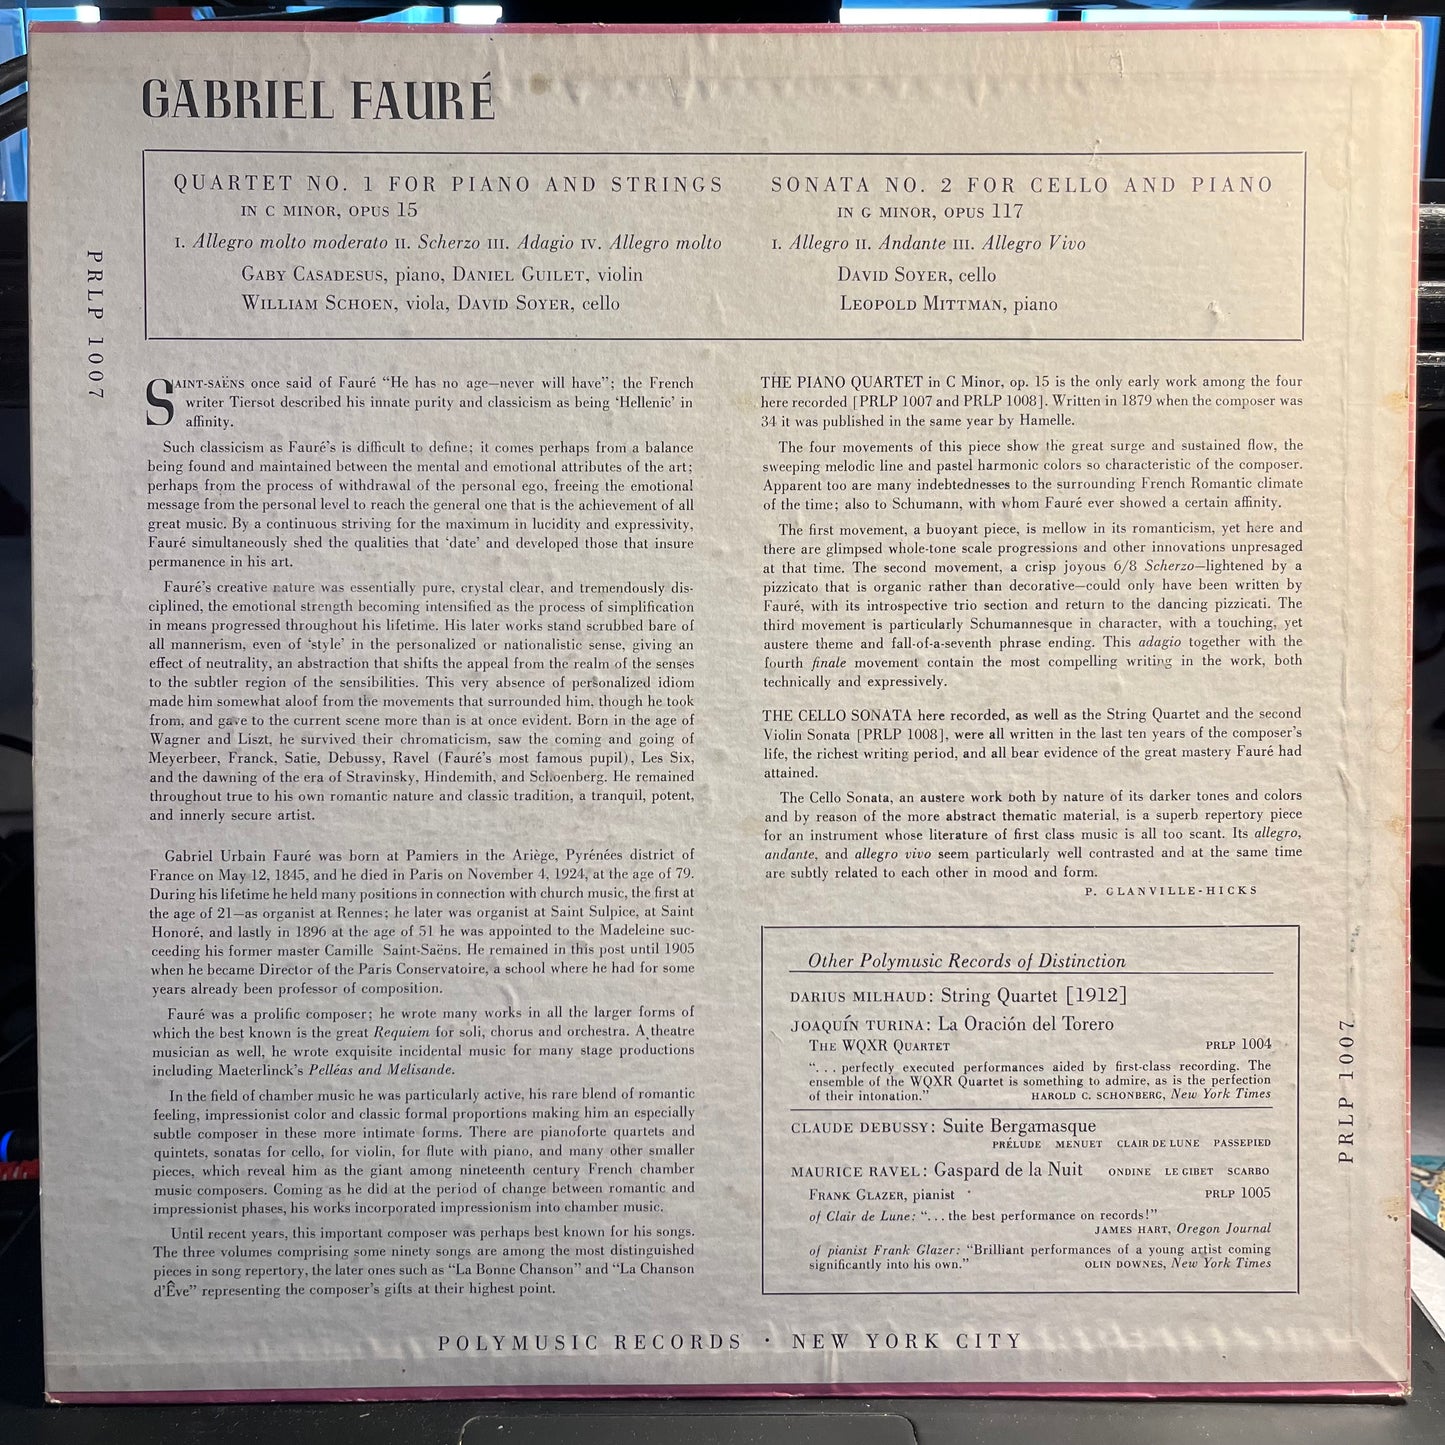 Gabriel Fauré Quartet No. 1 For Piano And Strings In C Minor, Opus 15 / Sonata No. 2 For Cello And Piano In G Minor, Opus 117 LP Excellent (EX) Very Good Plus (VG+)